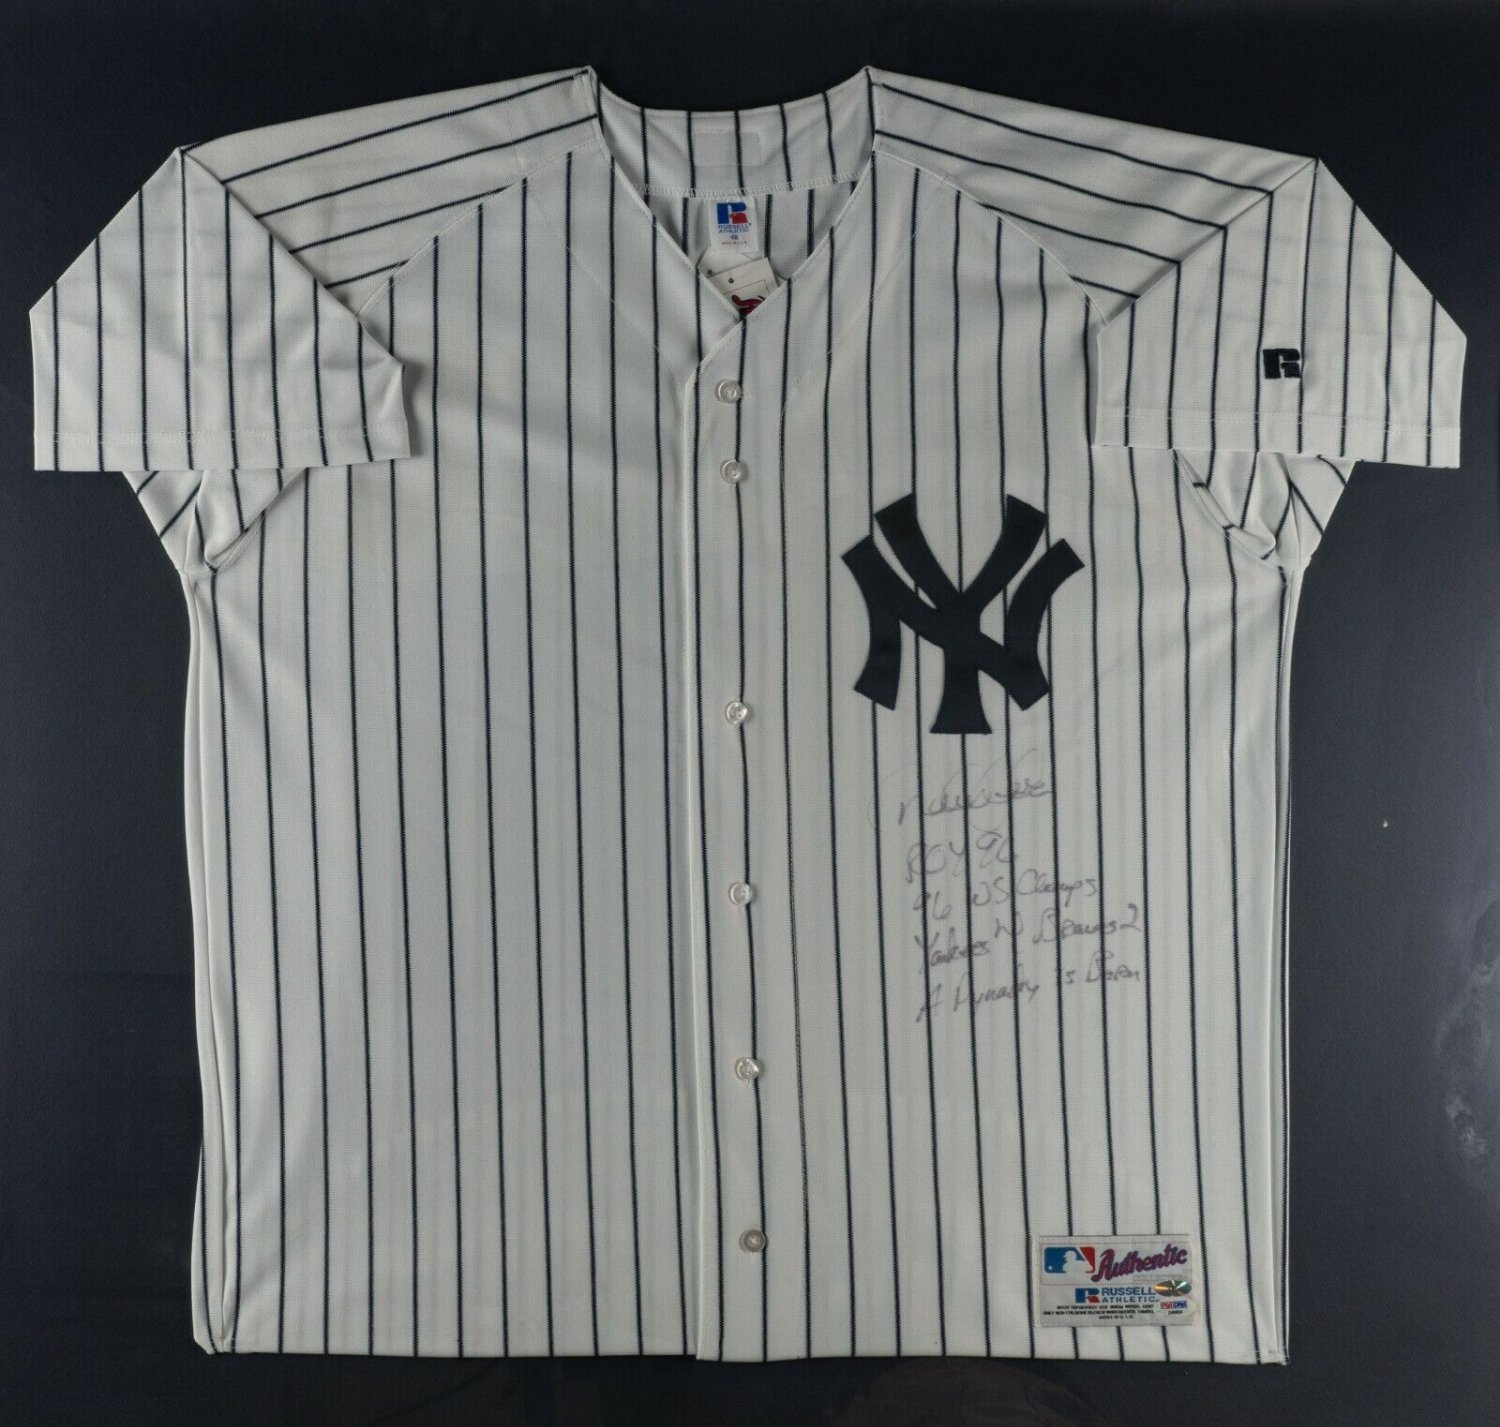 Derek Jeter Autographed Signed 1996 Rookie Of The Year Heavily